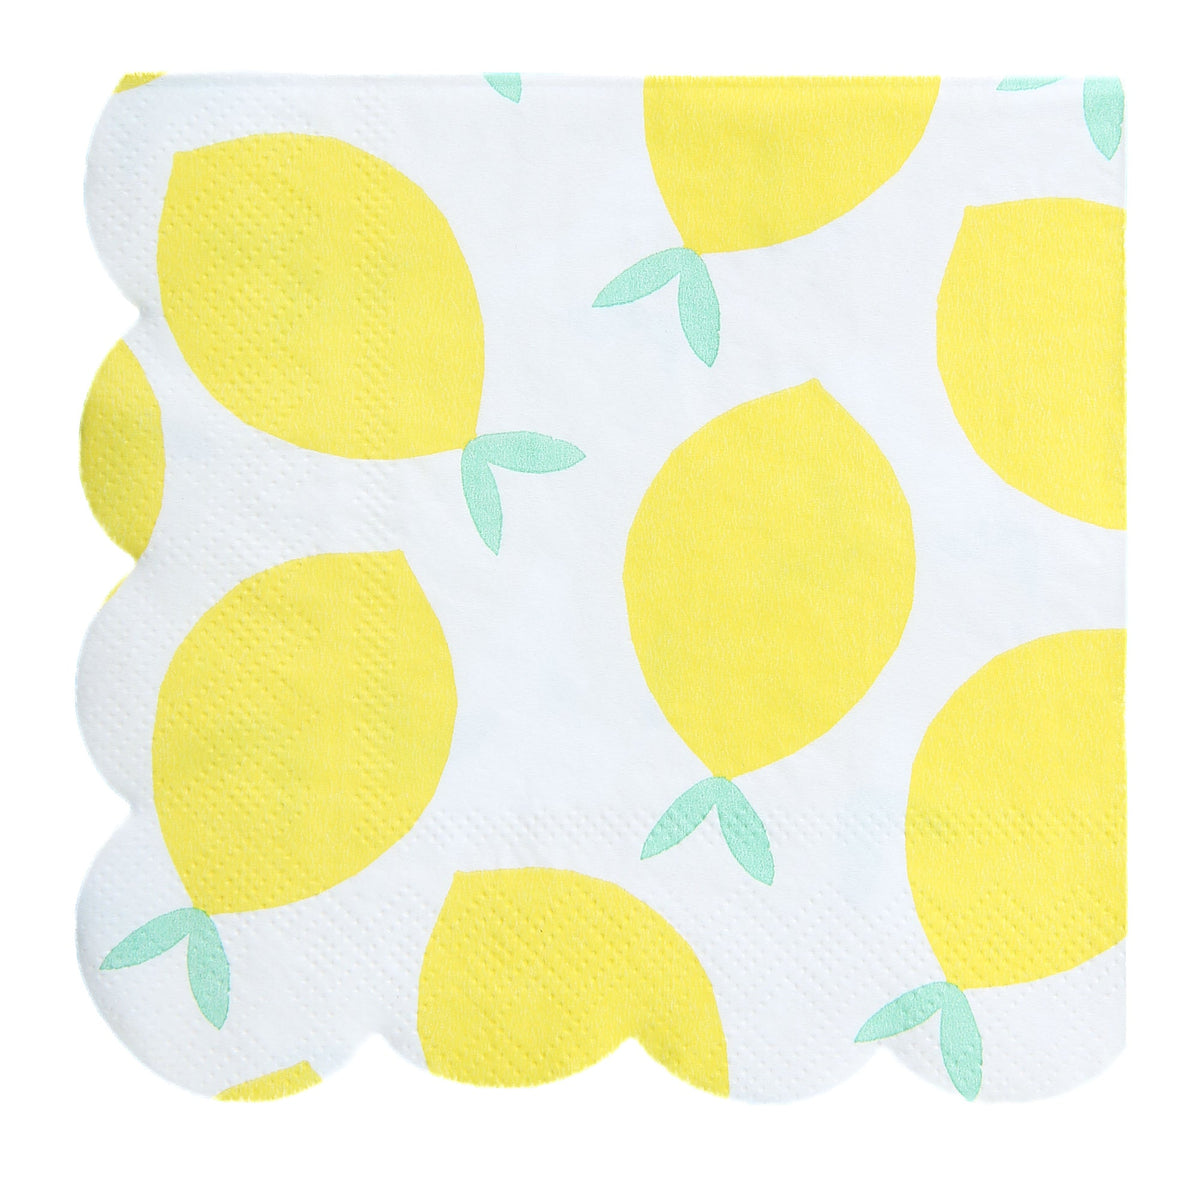 YIWU SANDY PAPER PRODUCTS CO., LTD Everyday Entertaining Lemoncello Small Beverage Napkins, 16 Count